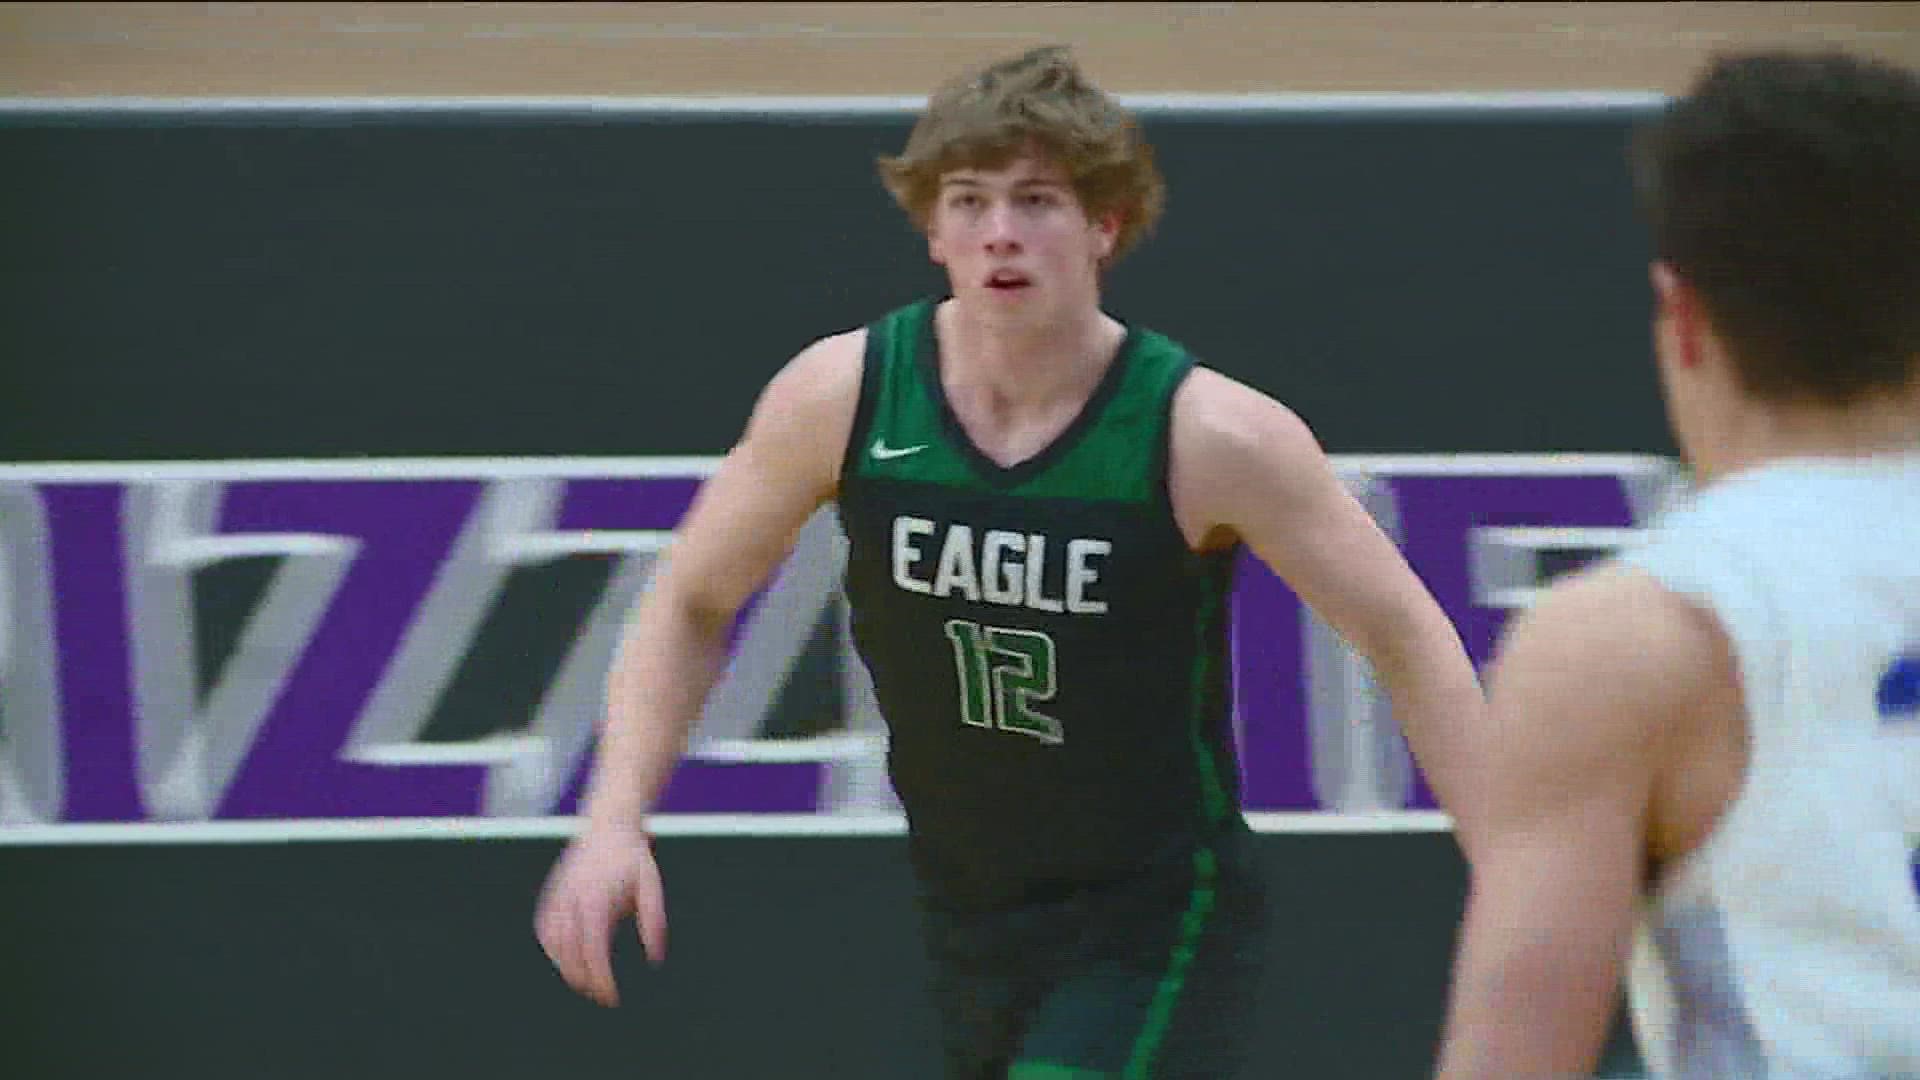 Landon White led the way for the Mustangs with 18 points Friday night as Eagle picked its 10th victory of the season with a 56-42 win at Rocky Mountain.